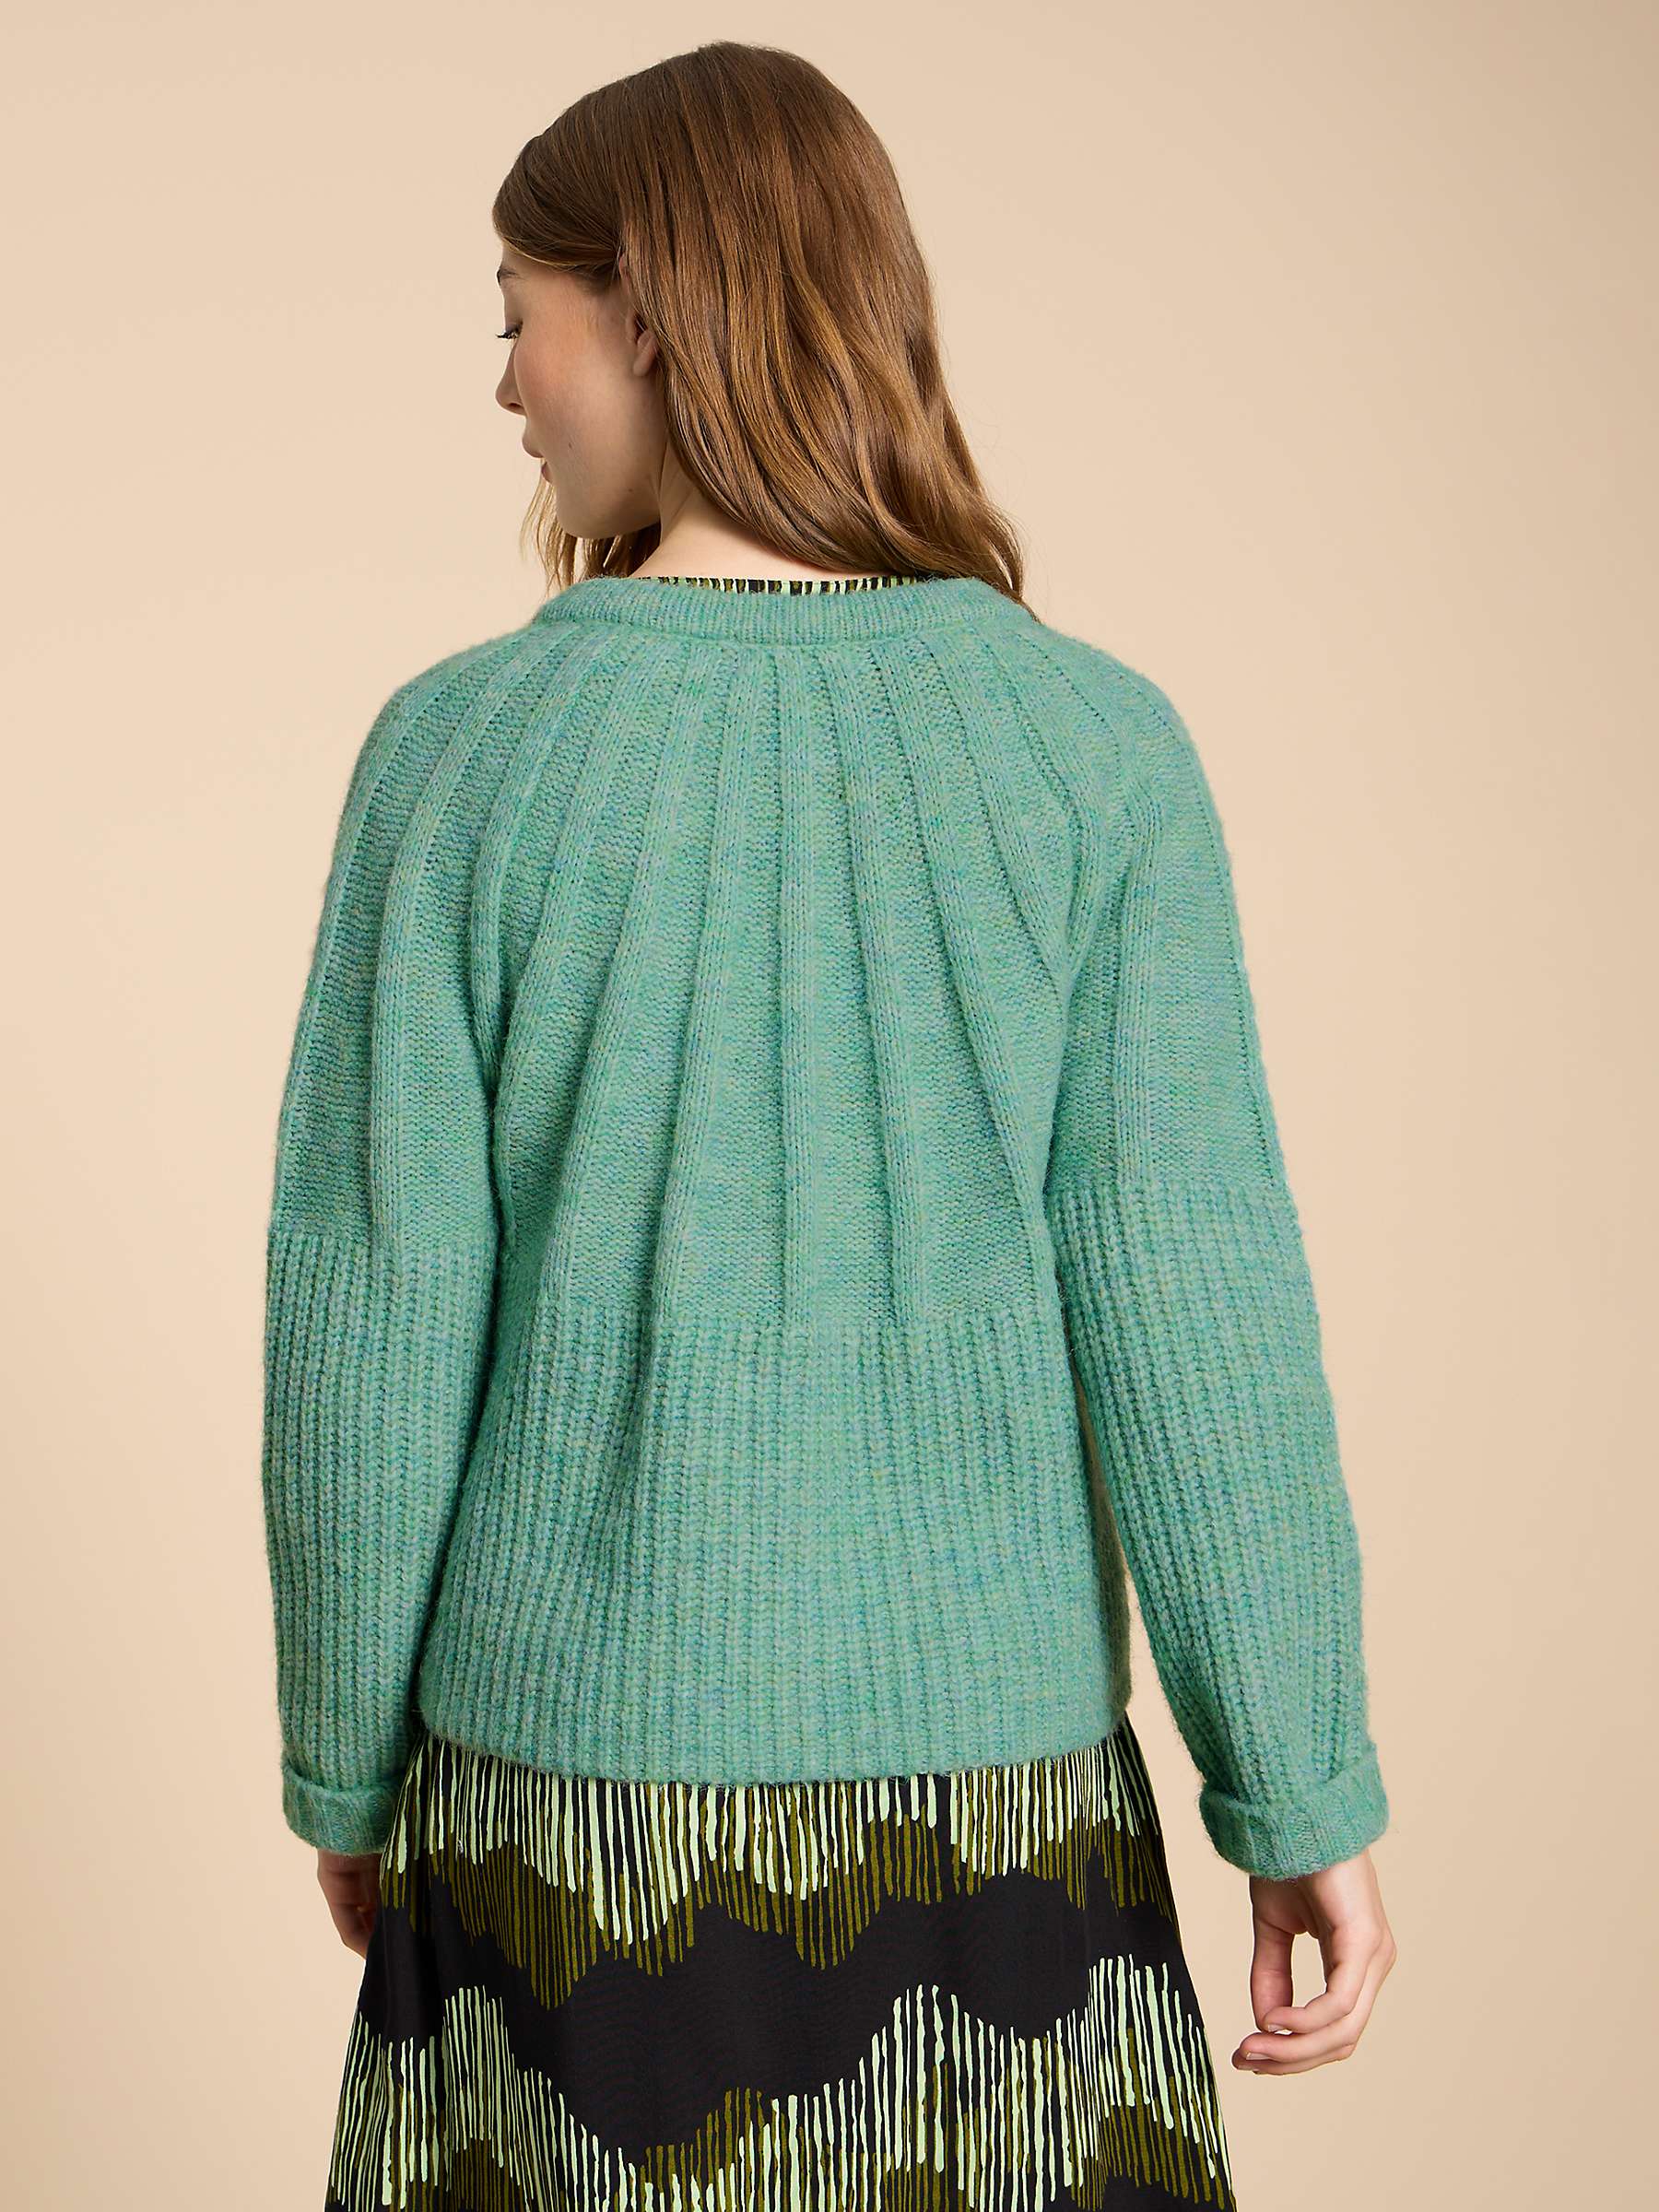 Buy White Stuff Clover Chunky Knit Cardigan, Mid Green Online at johnlewis.com